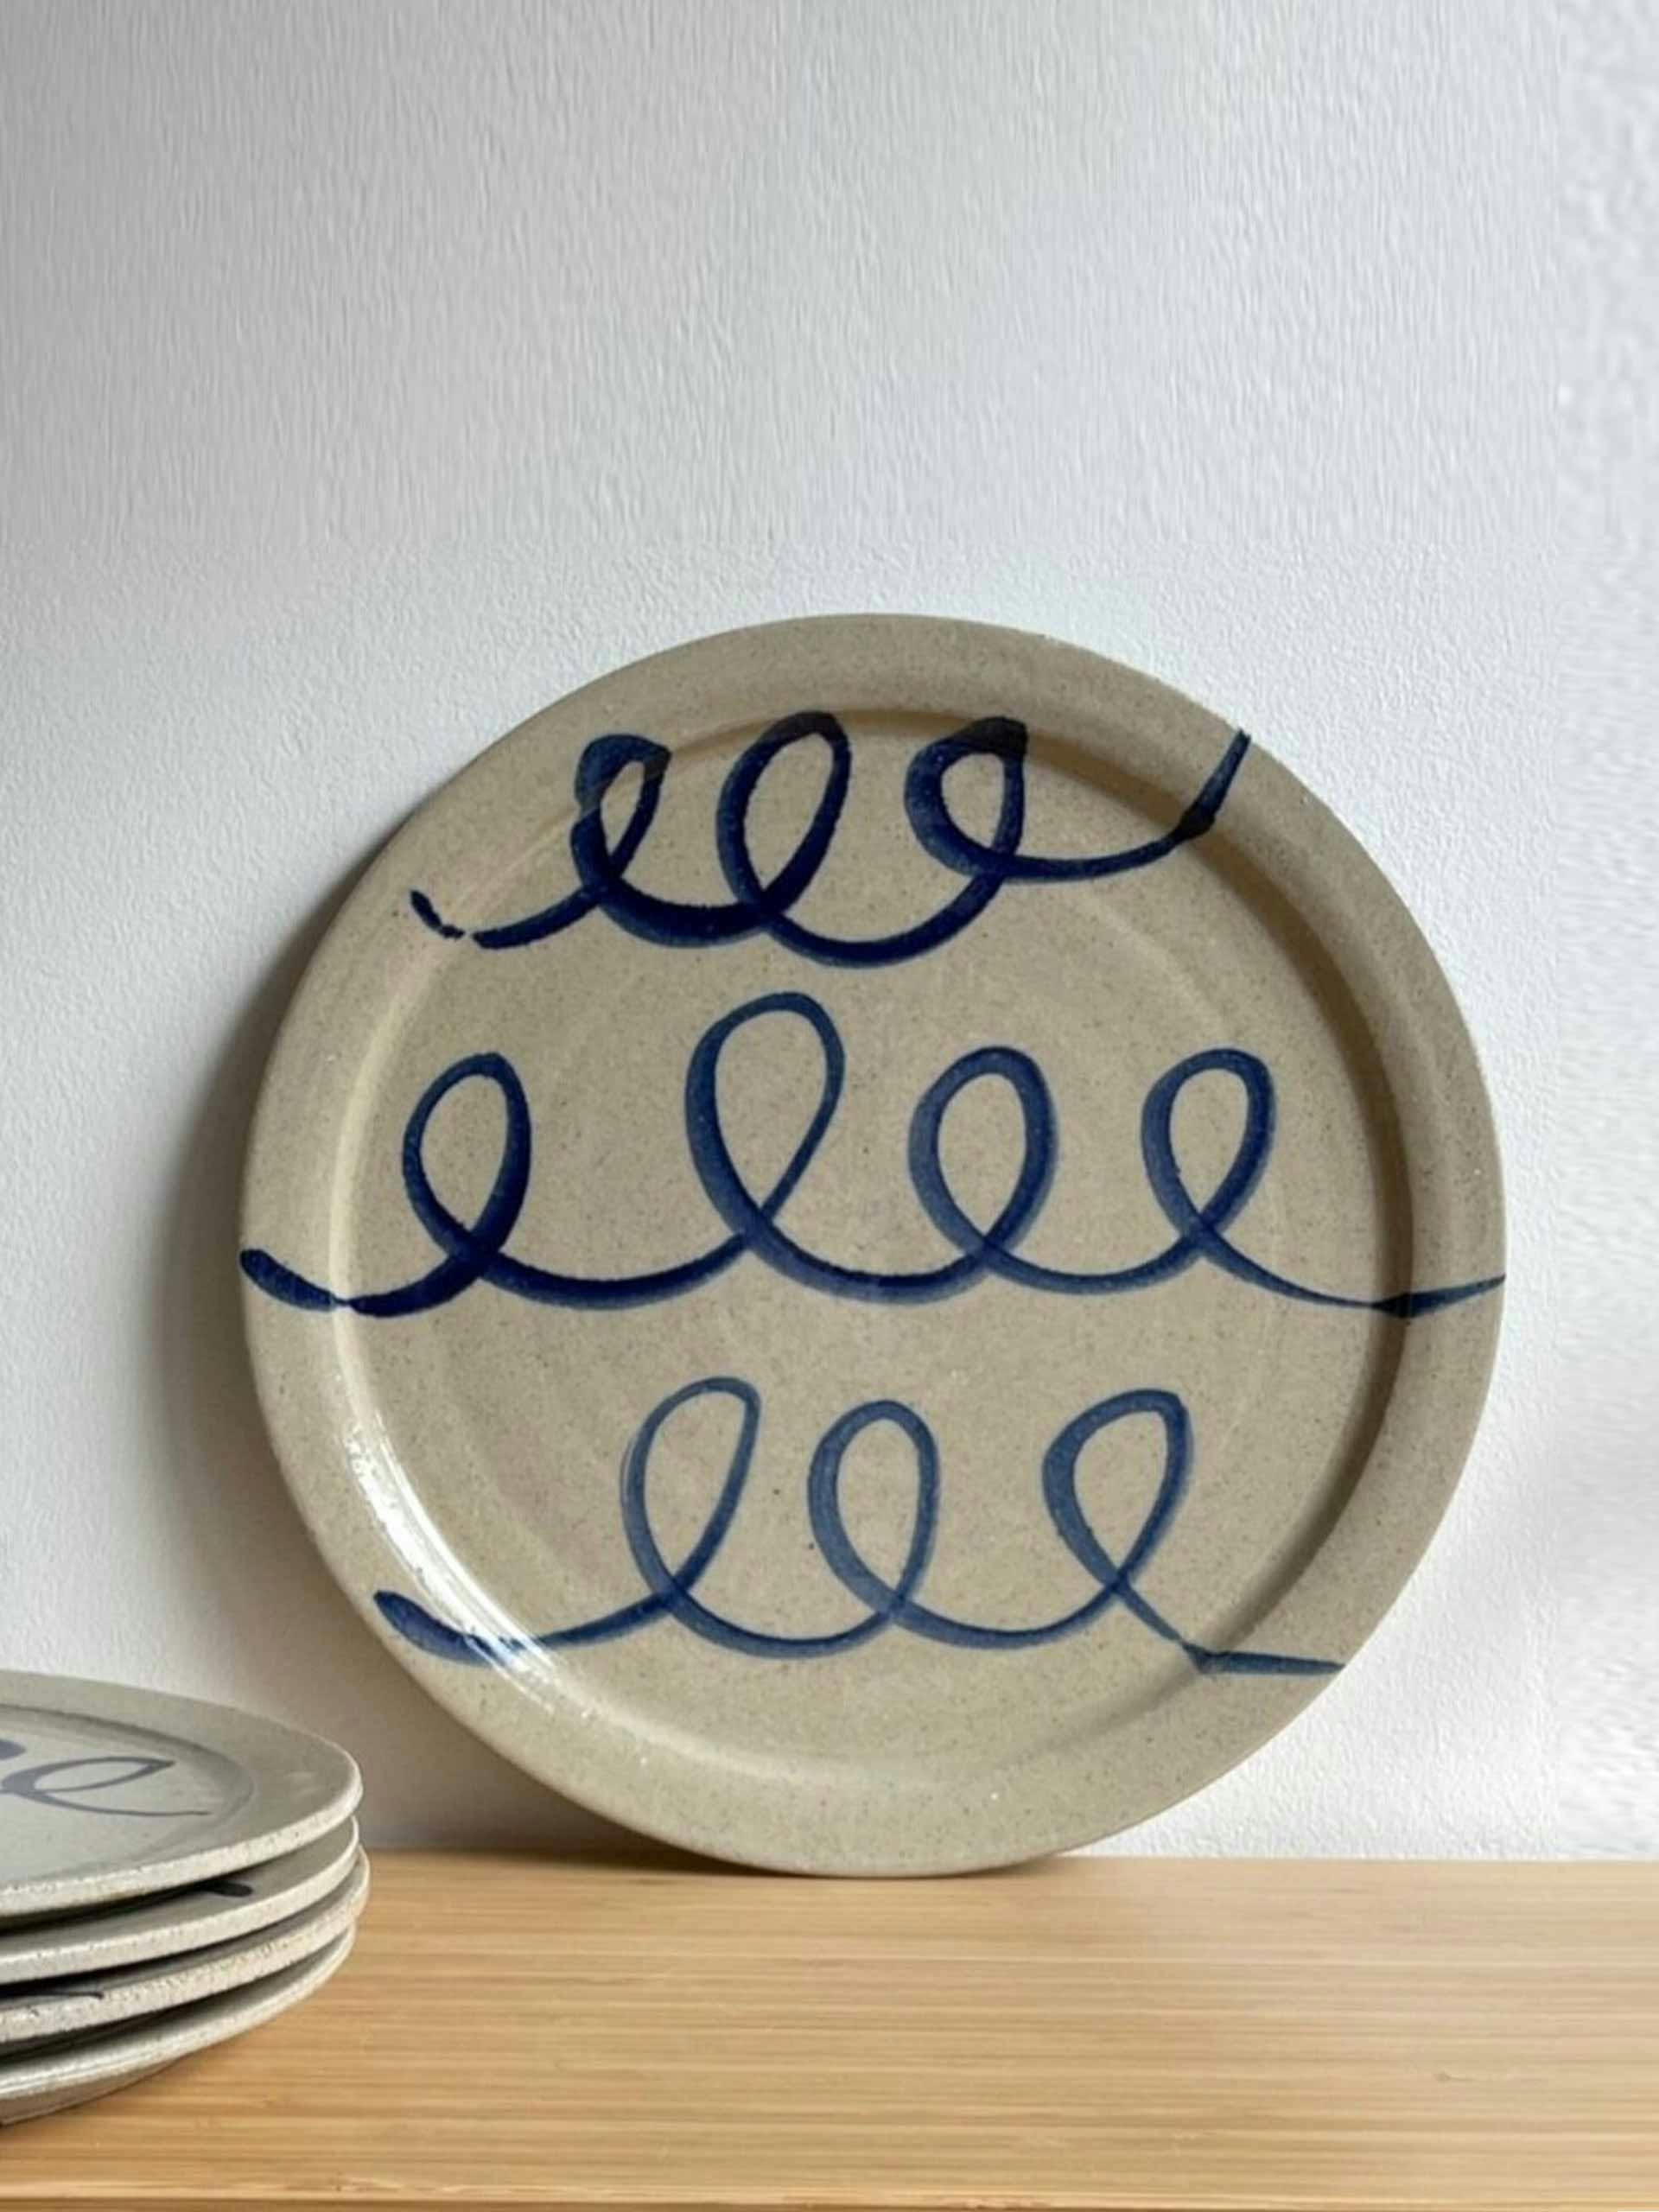 Squiggle plate